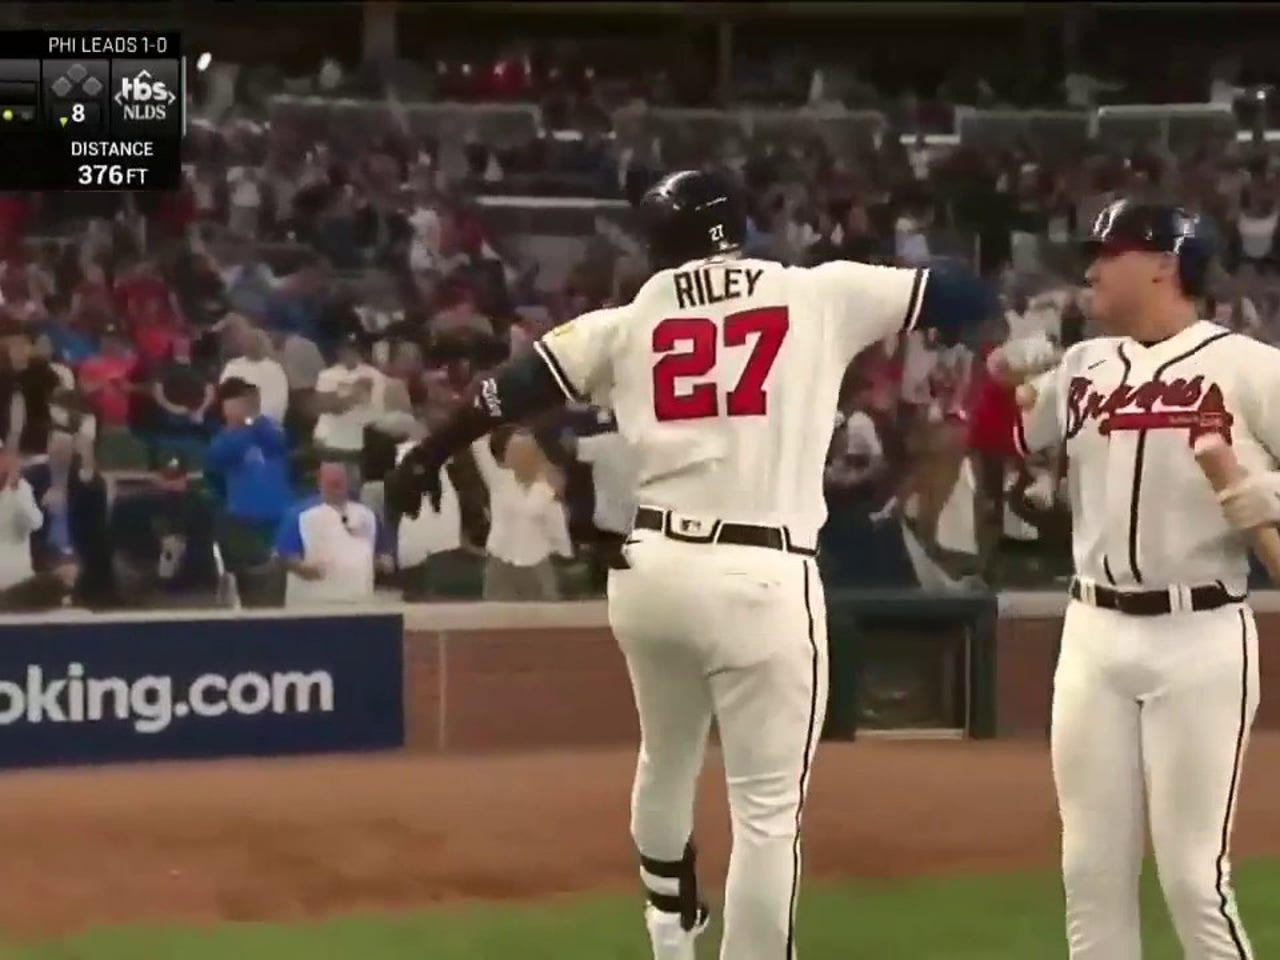 Austin Riley smashes a go-ahead, two-run homer in the eighth